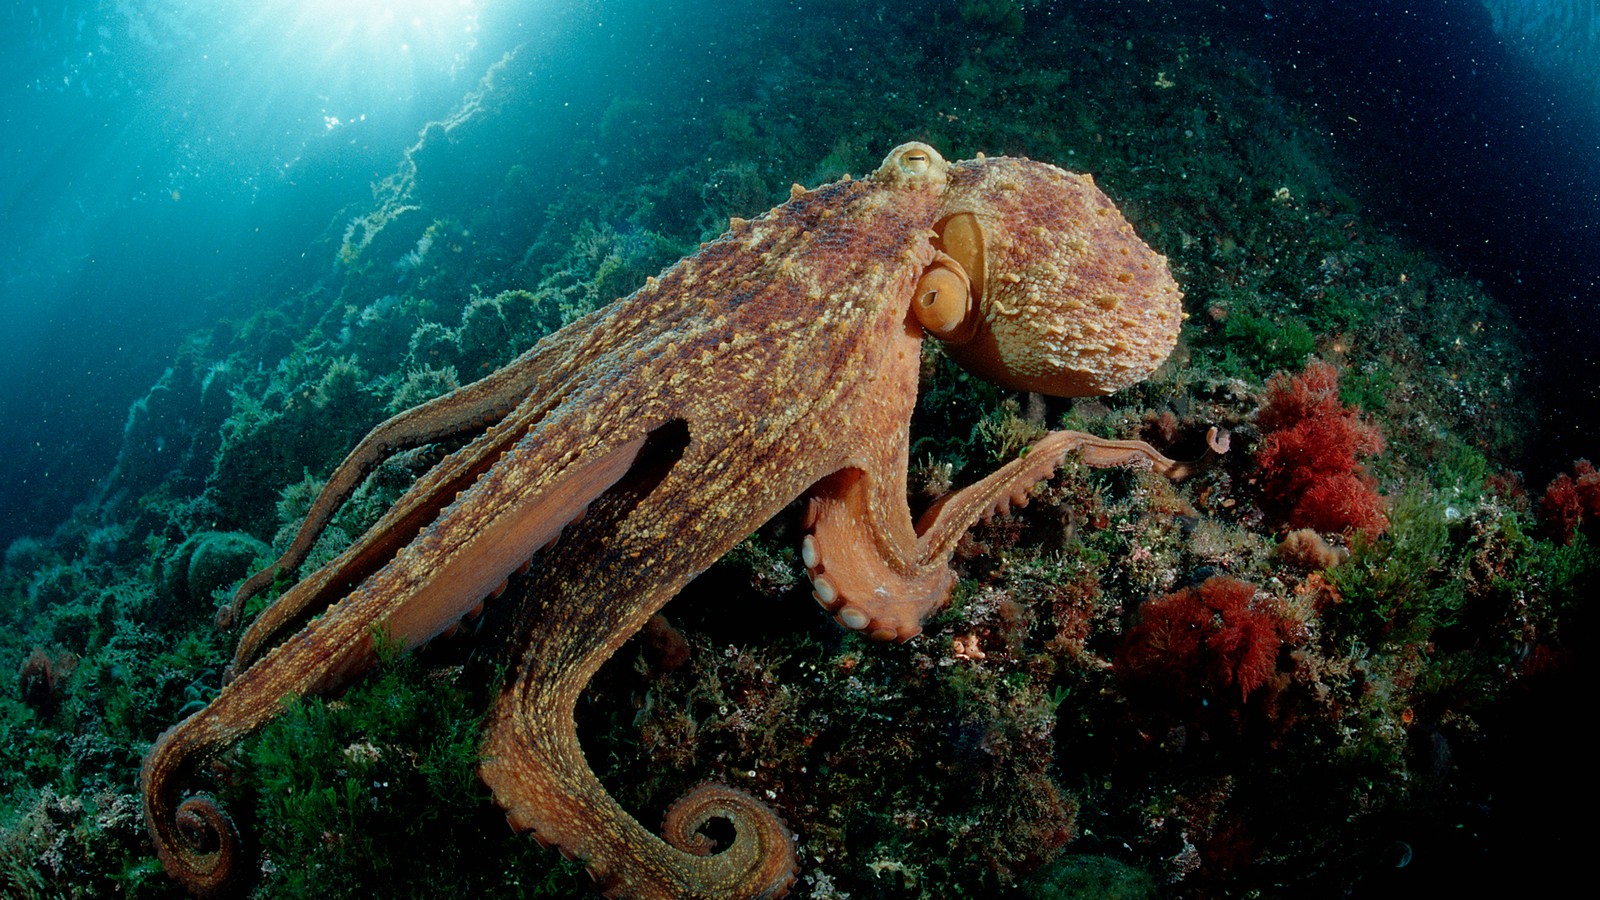 How Smart Is an Octopus? - The Atlantic